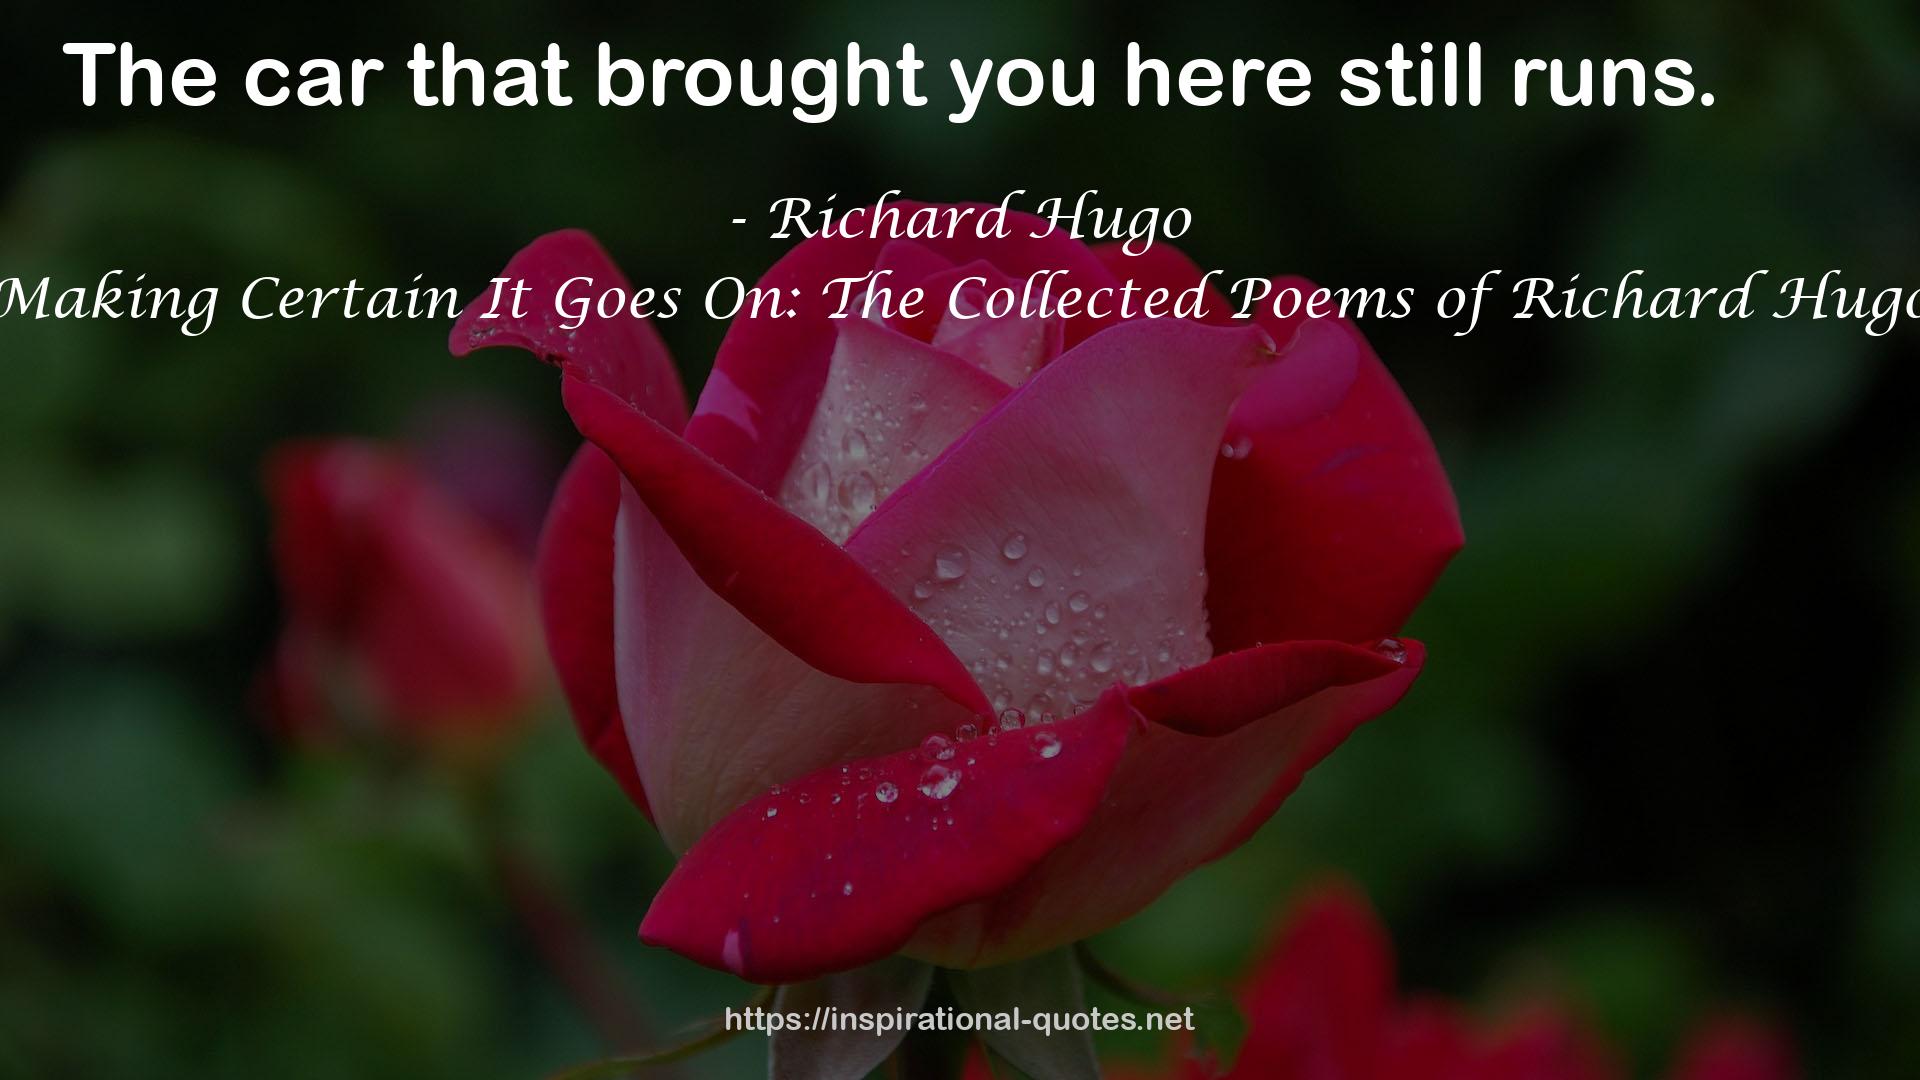 Making Certain It Goes On: The Collected Poems of Richard Hugo QUOTES